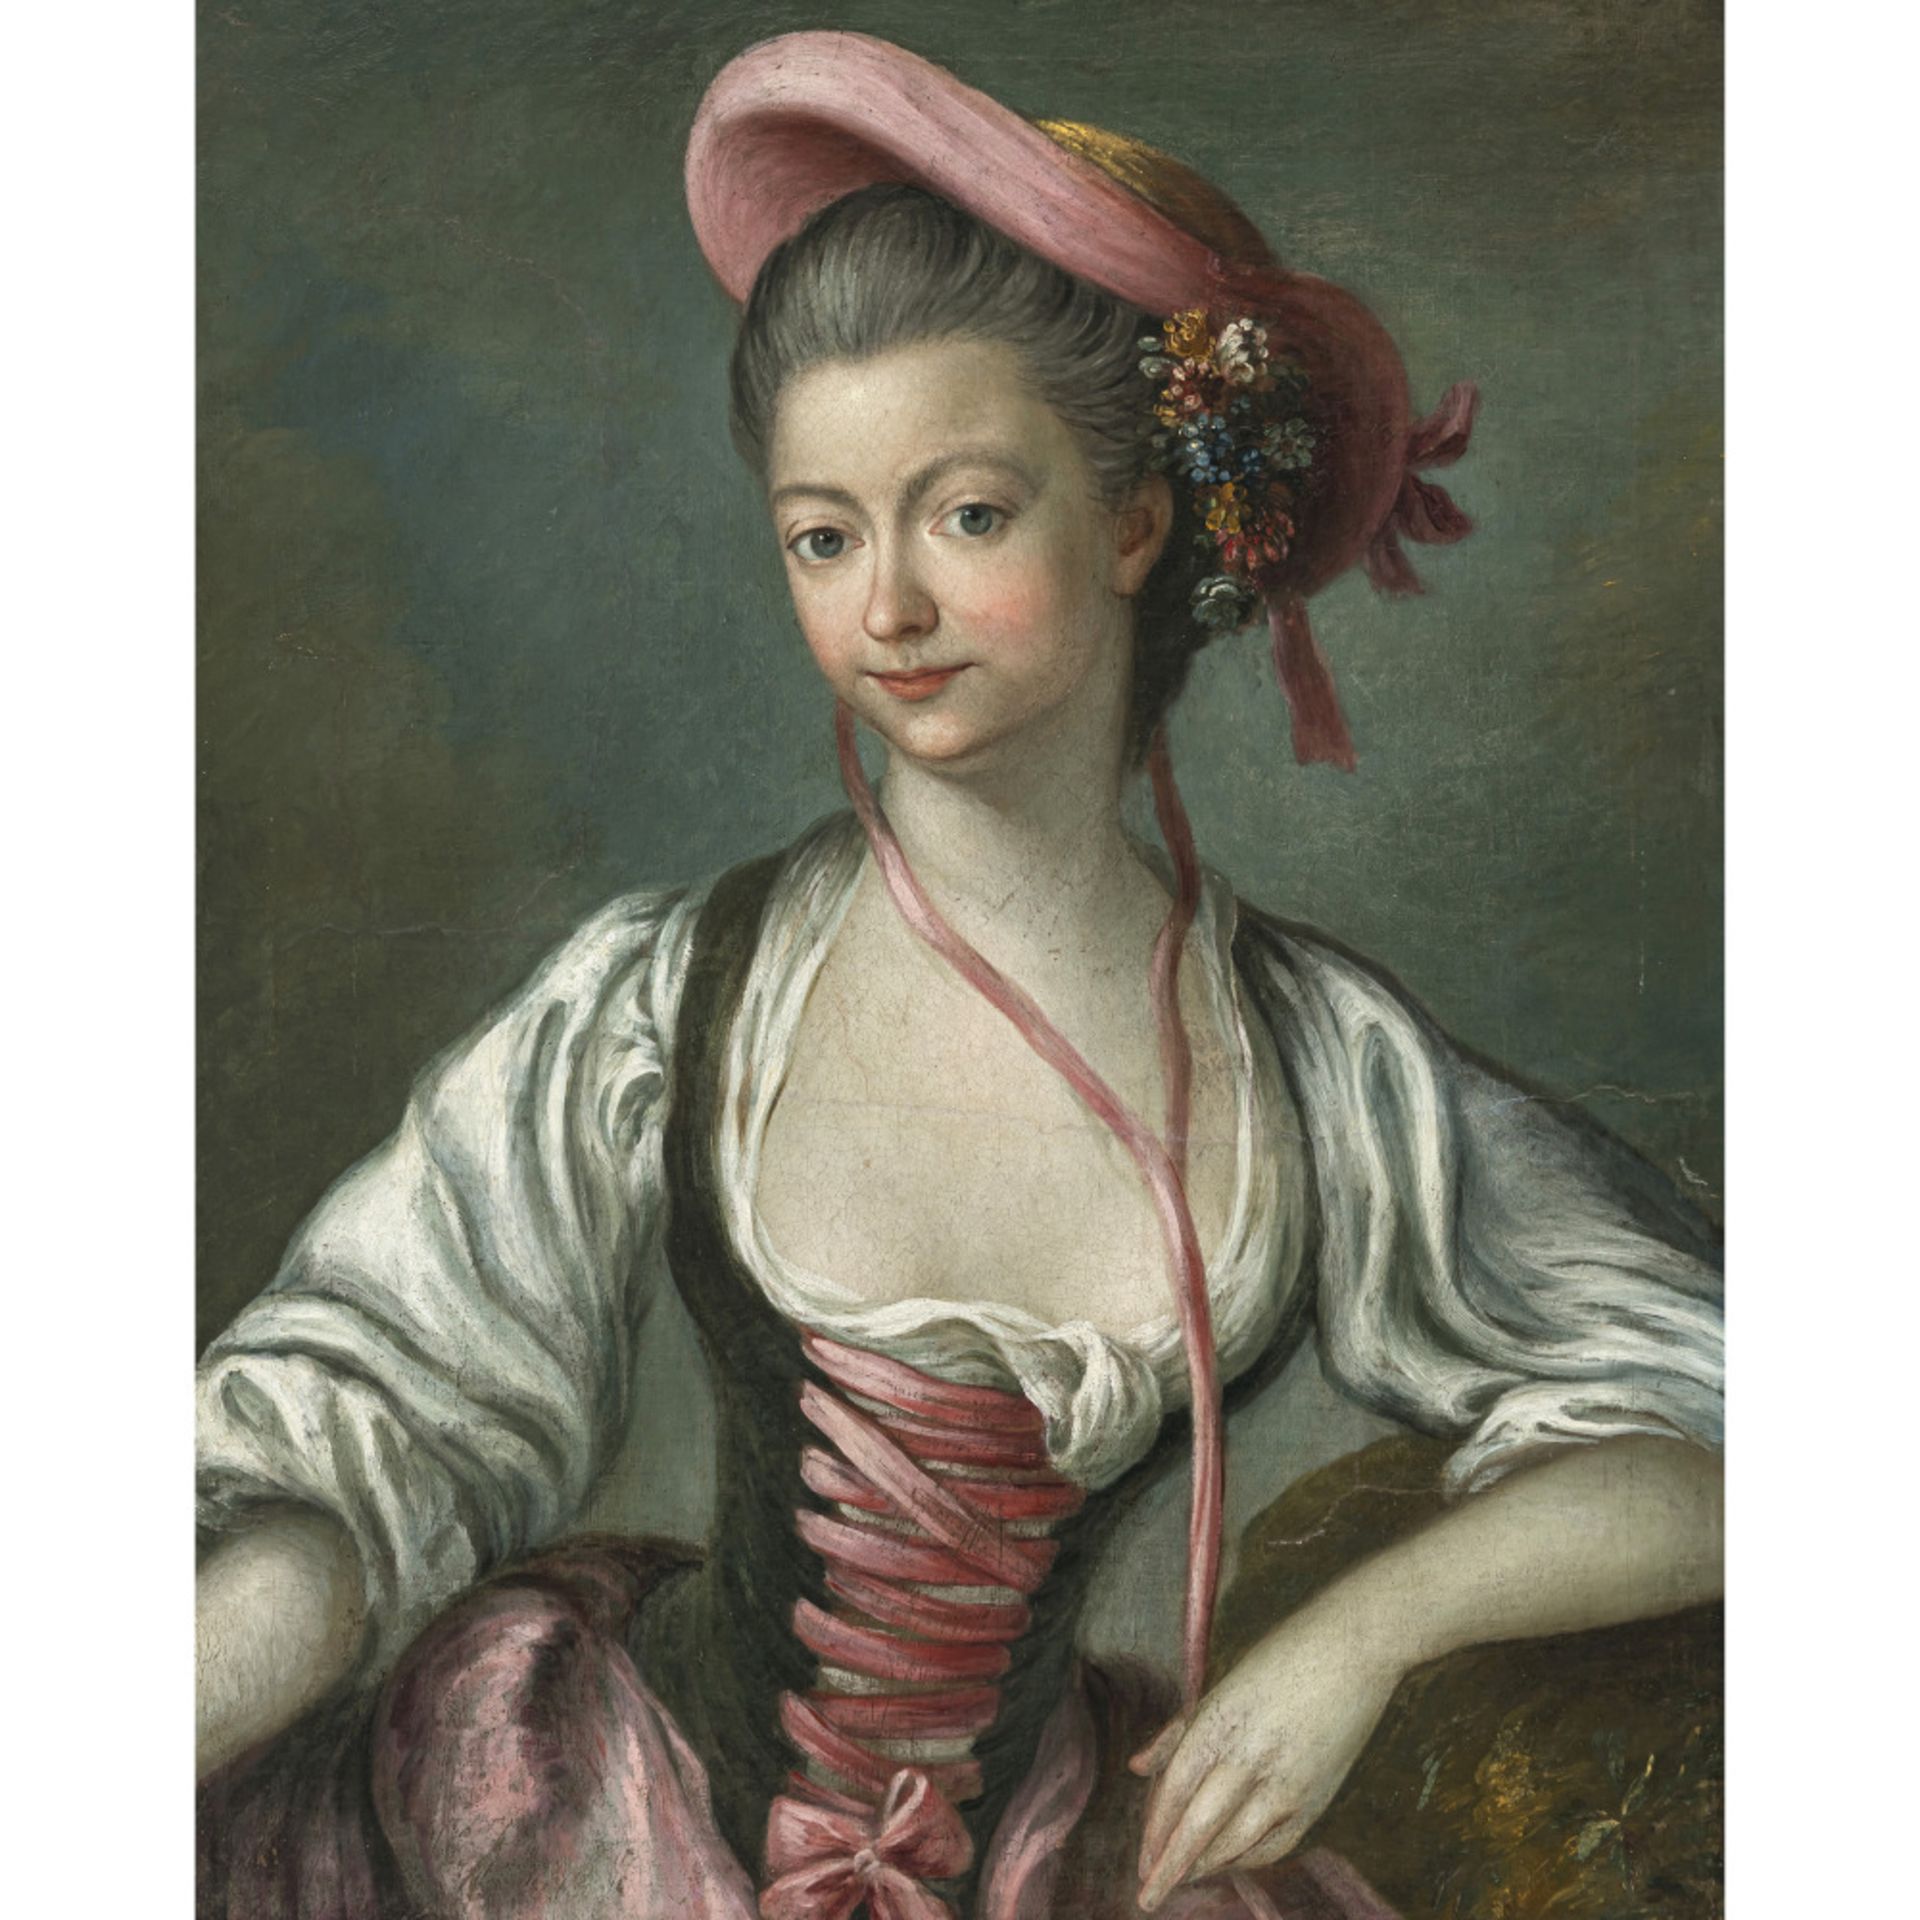 Unbekannt 18th century - Seated young shepherdess